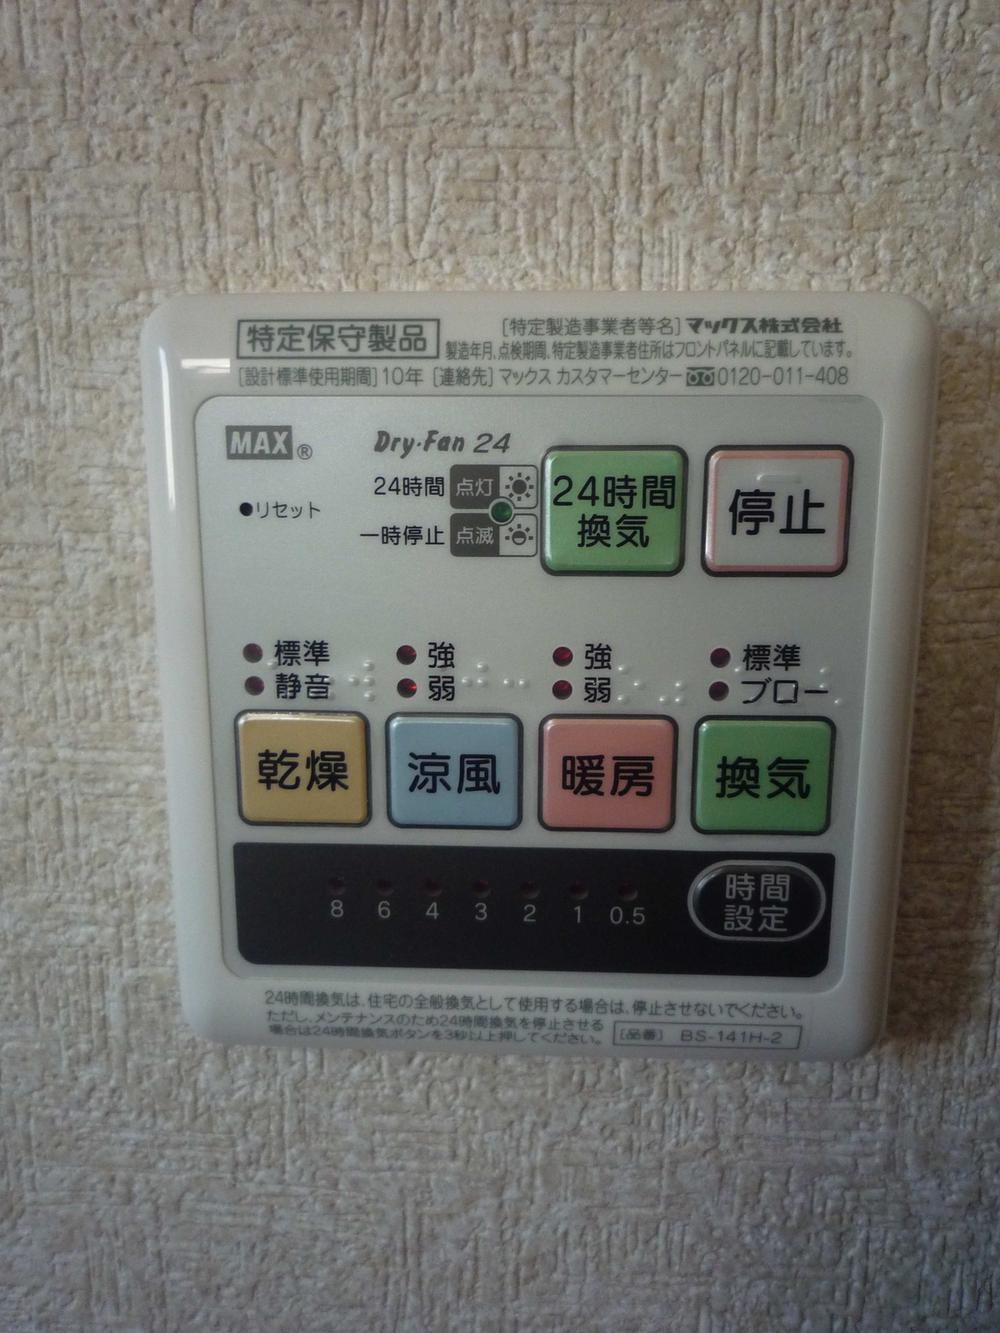 Other. Bathroom ventilation ・ Drying ・ Cool breeze ・ heating